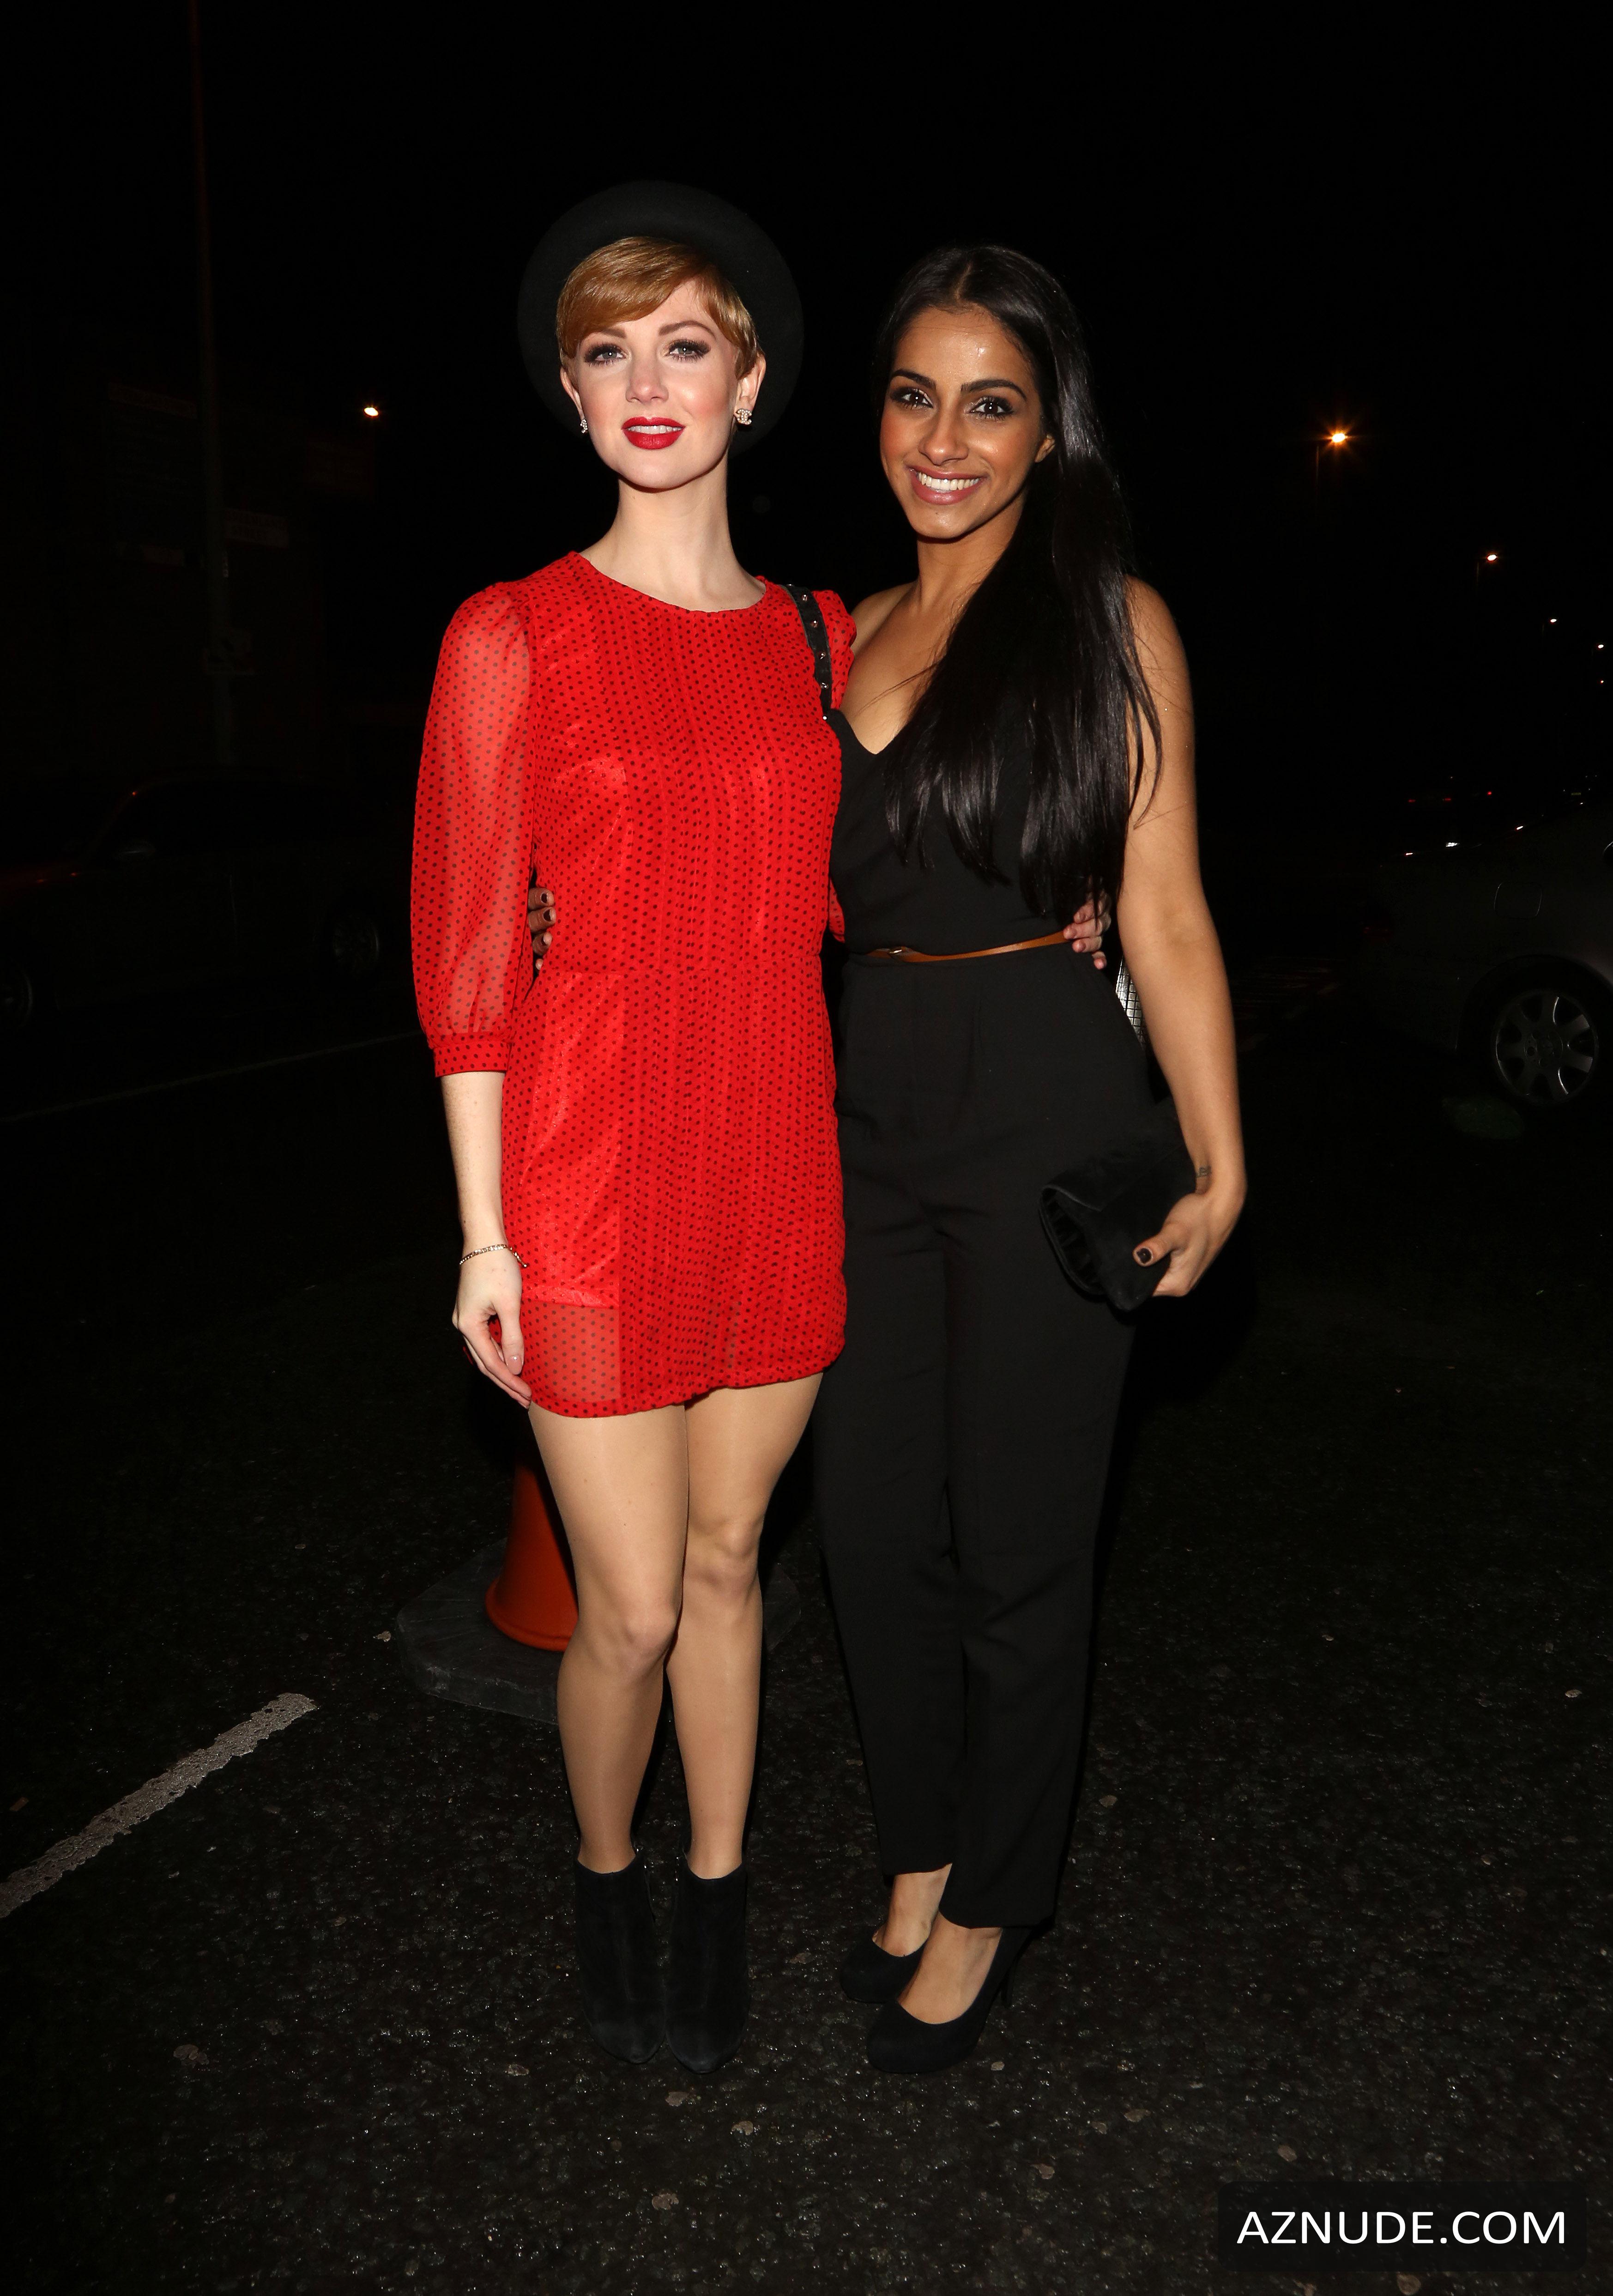 barrie gardner recommends mandip gill nude pic